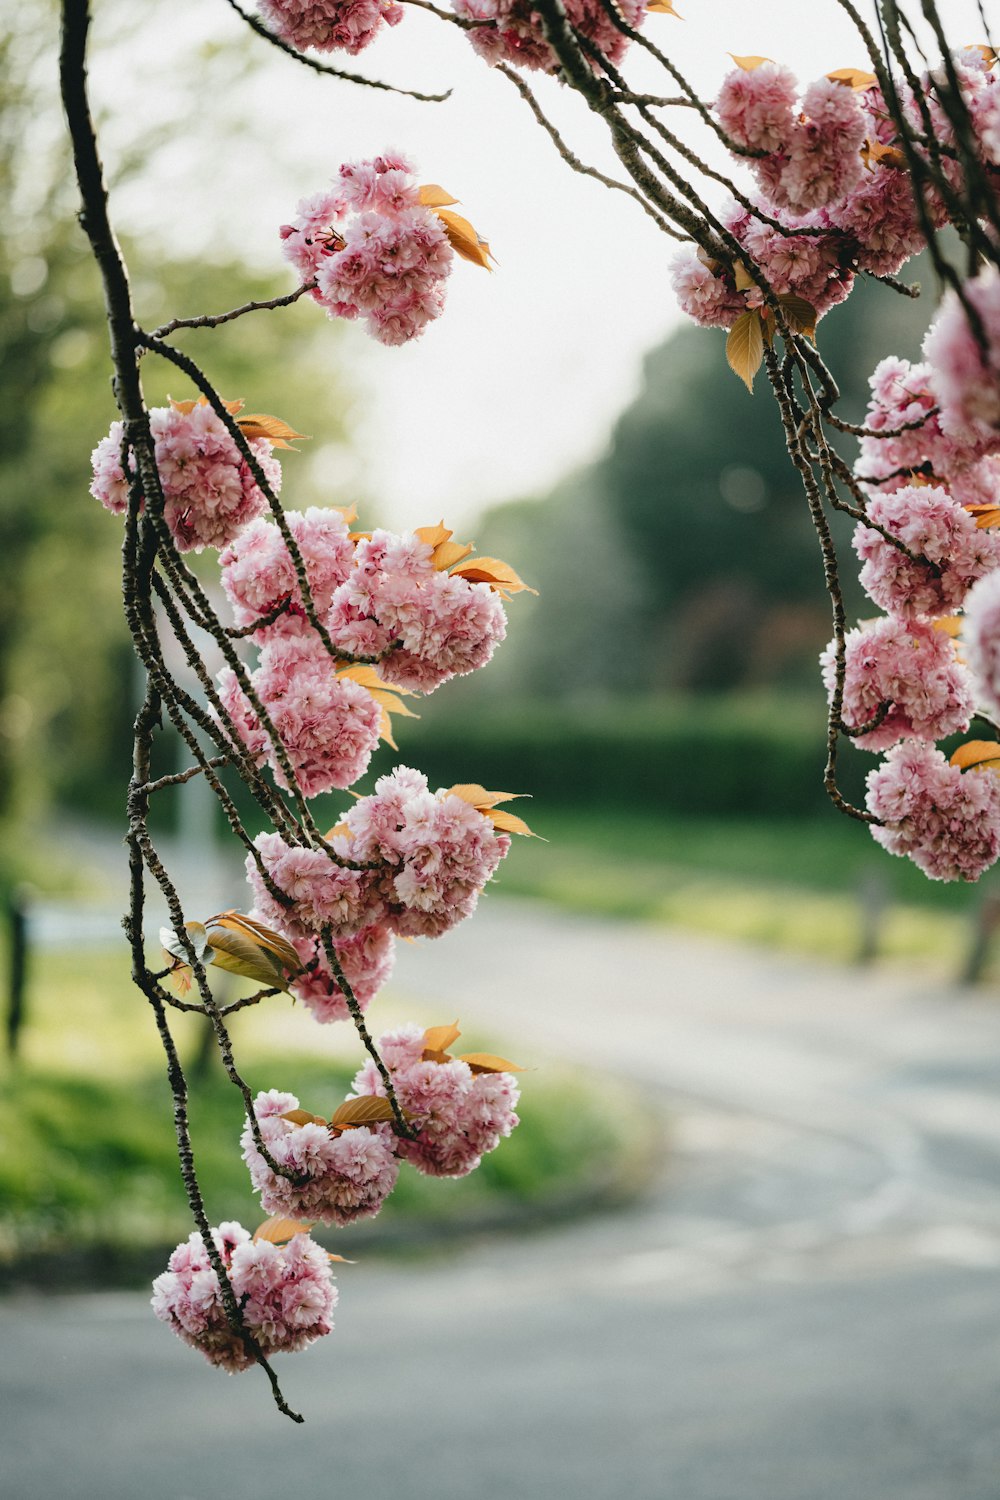 pink and white flowers on tree branch during daytime